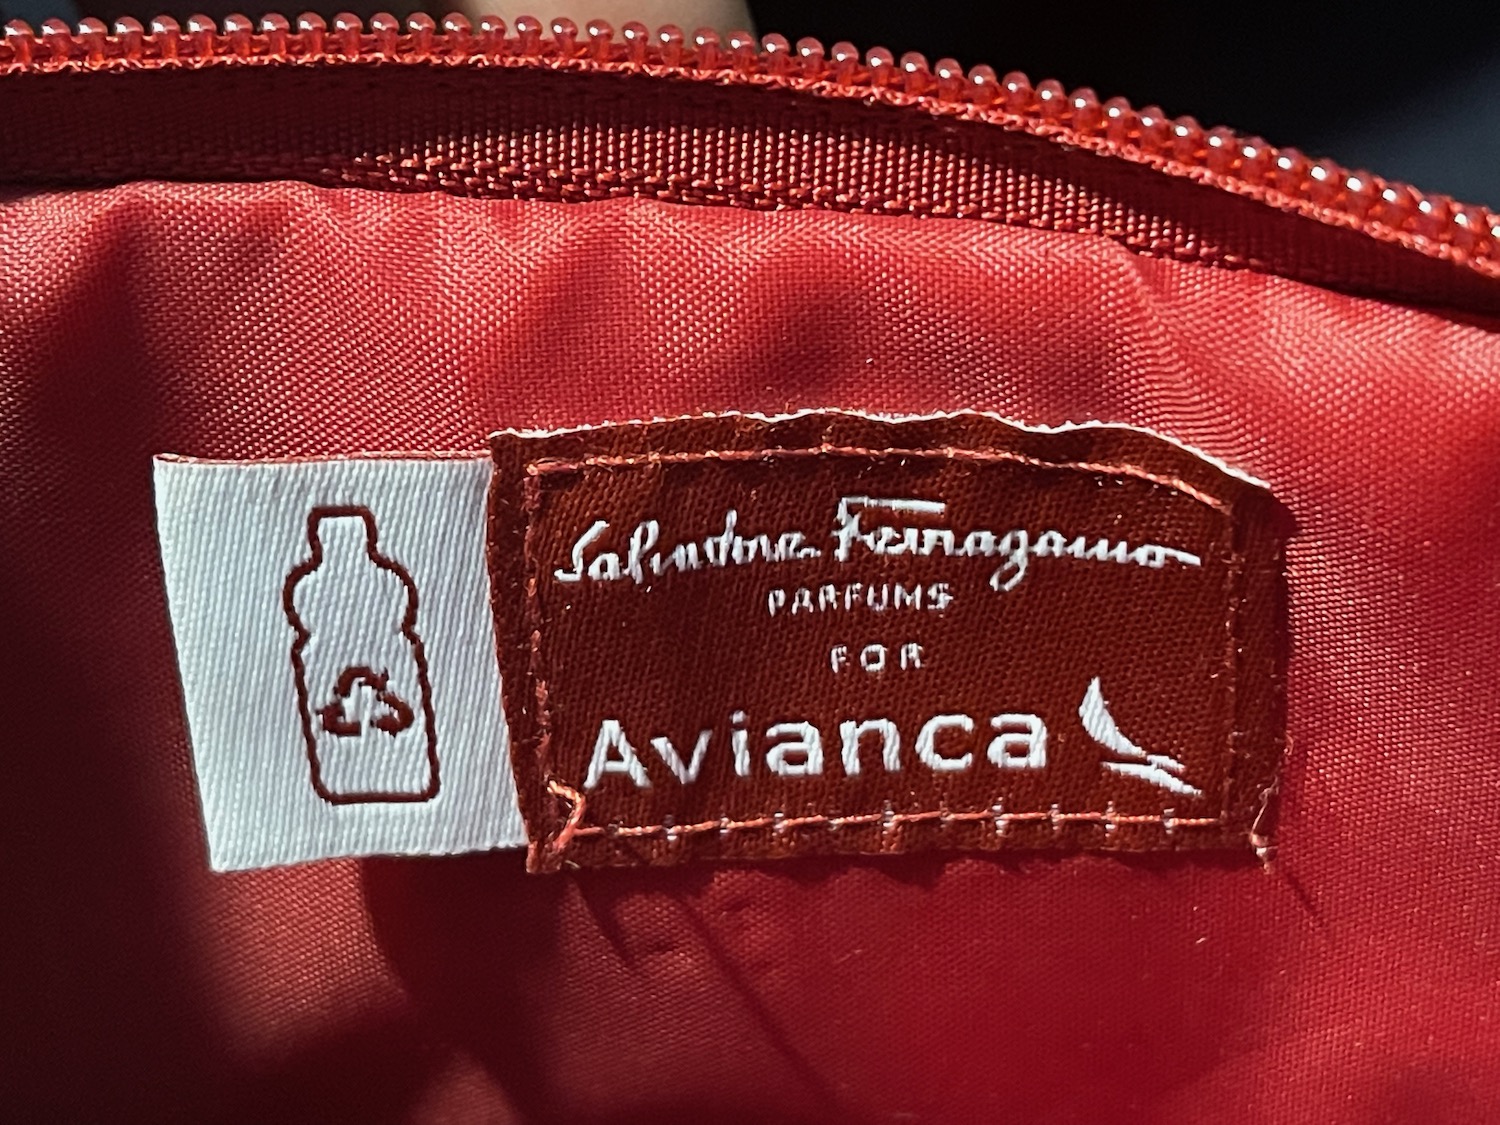 a label on a red bag